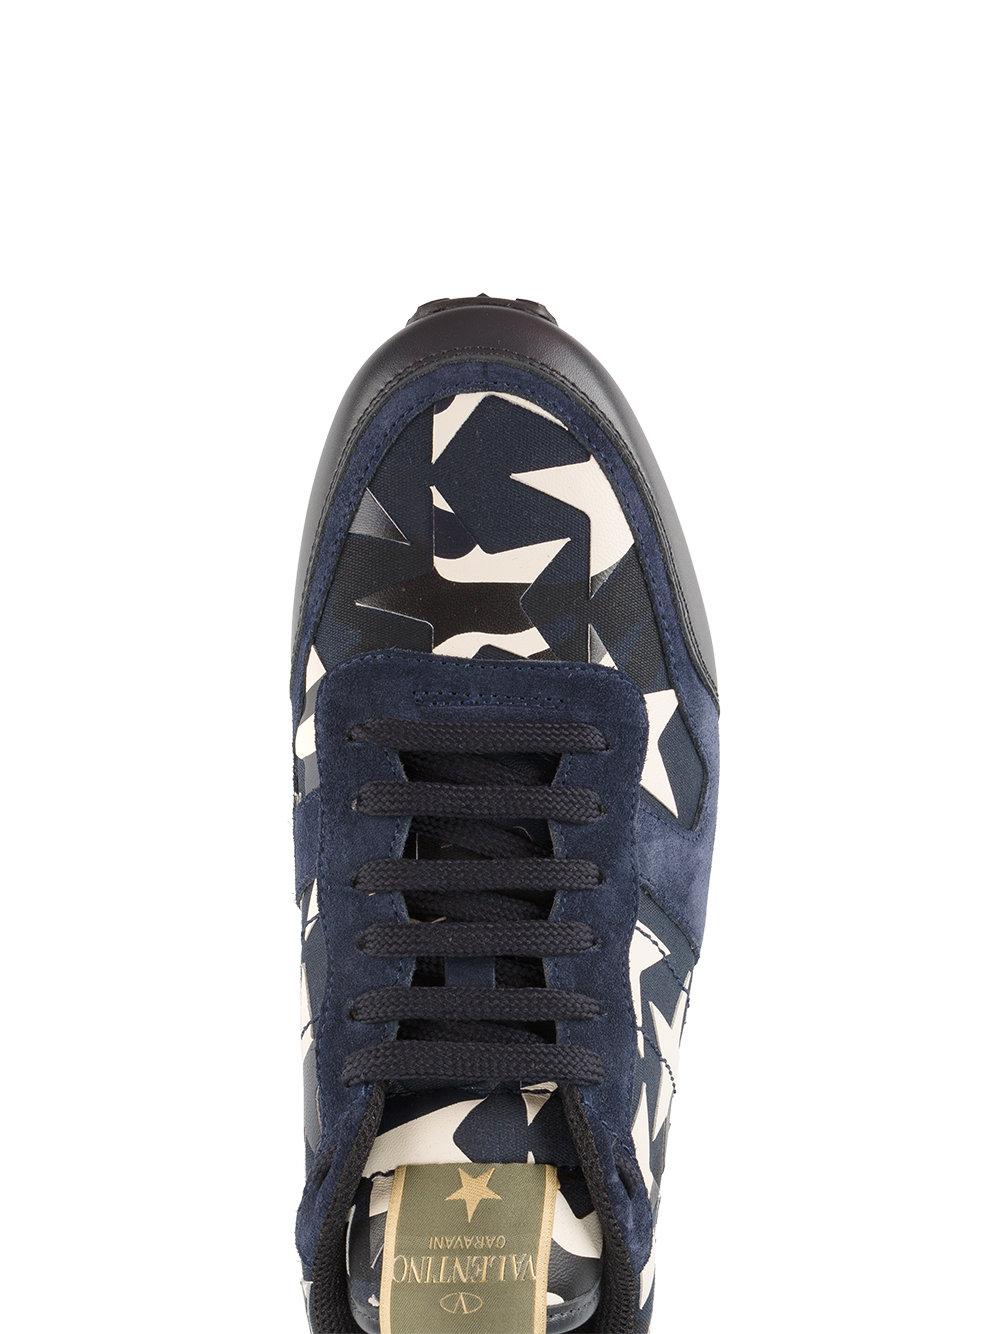 Valentino Leather Star-print Sneakers in Blue for Men - Lyst